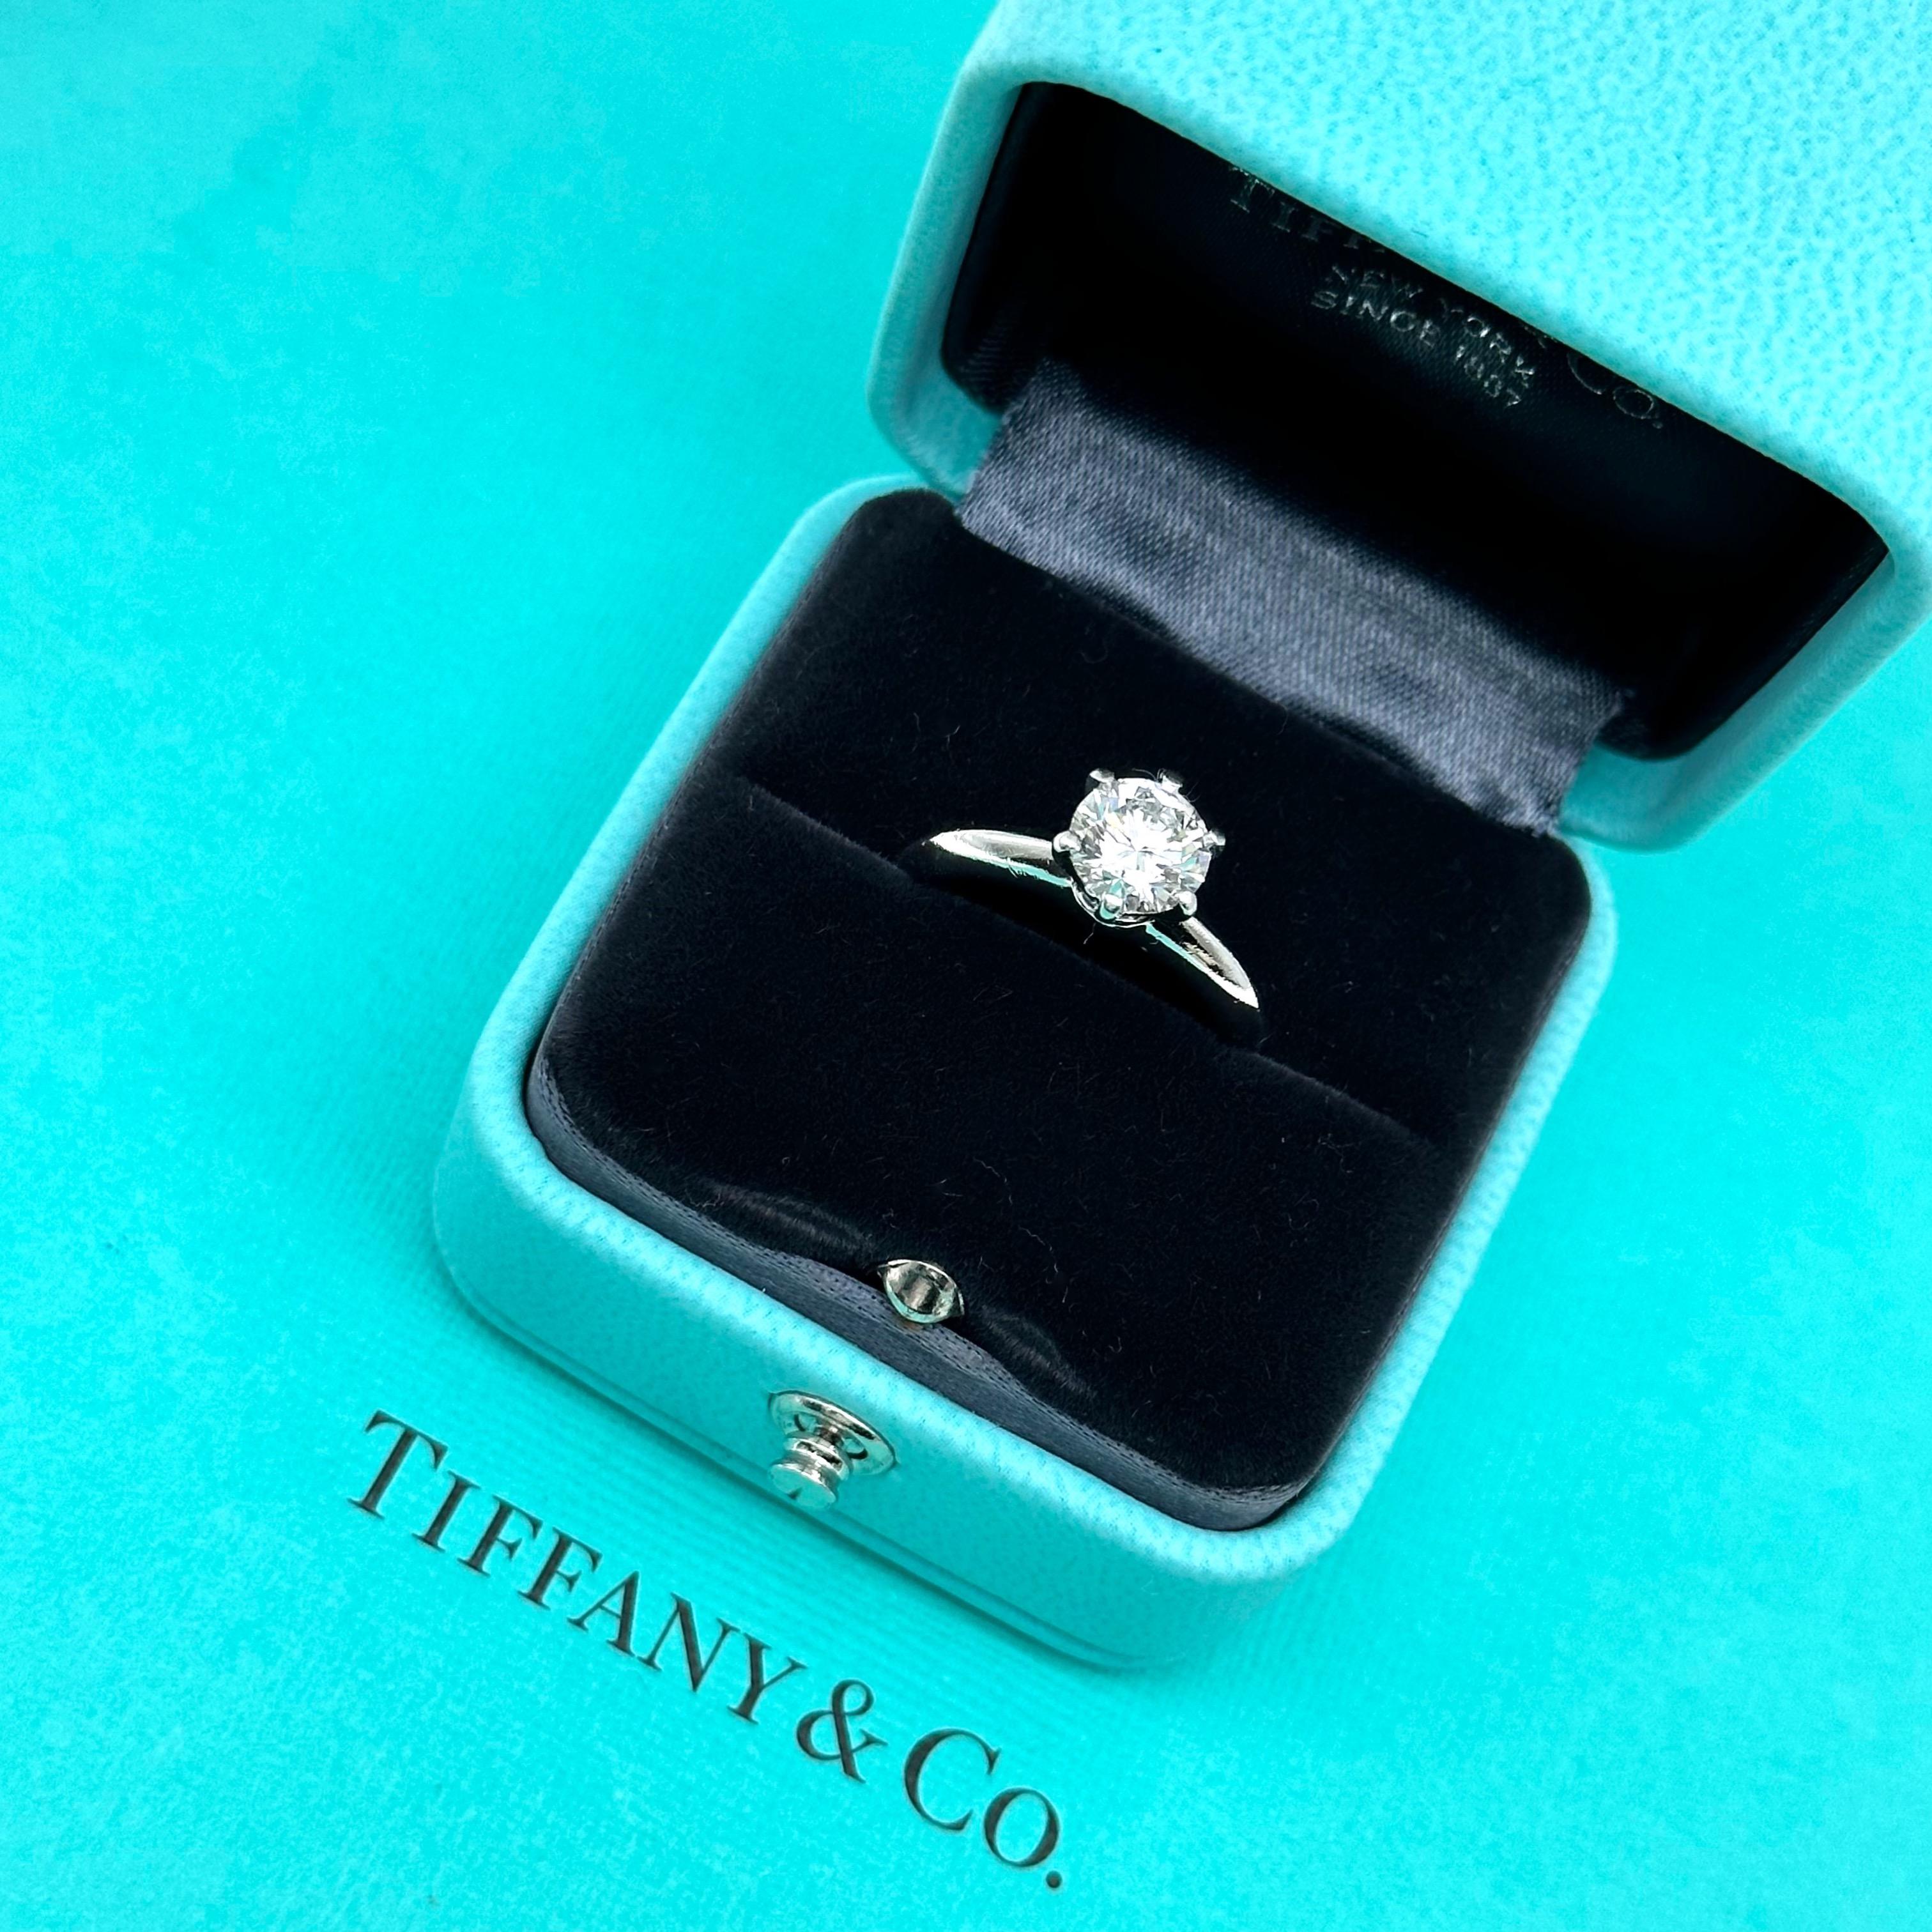 Tiffany & Co. Round Brilliant Diamond 1.05 Cts I VVS2 Engagement Ring Platinum In Excellent Condition For Sale In San Diego, CA